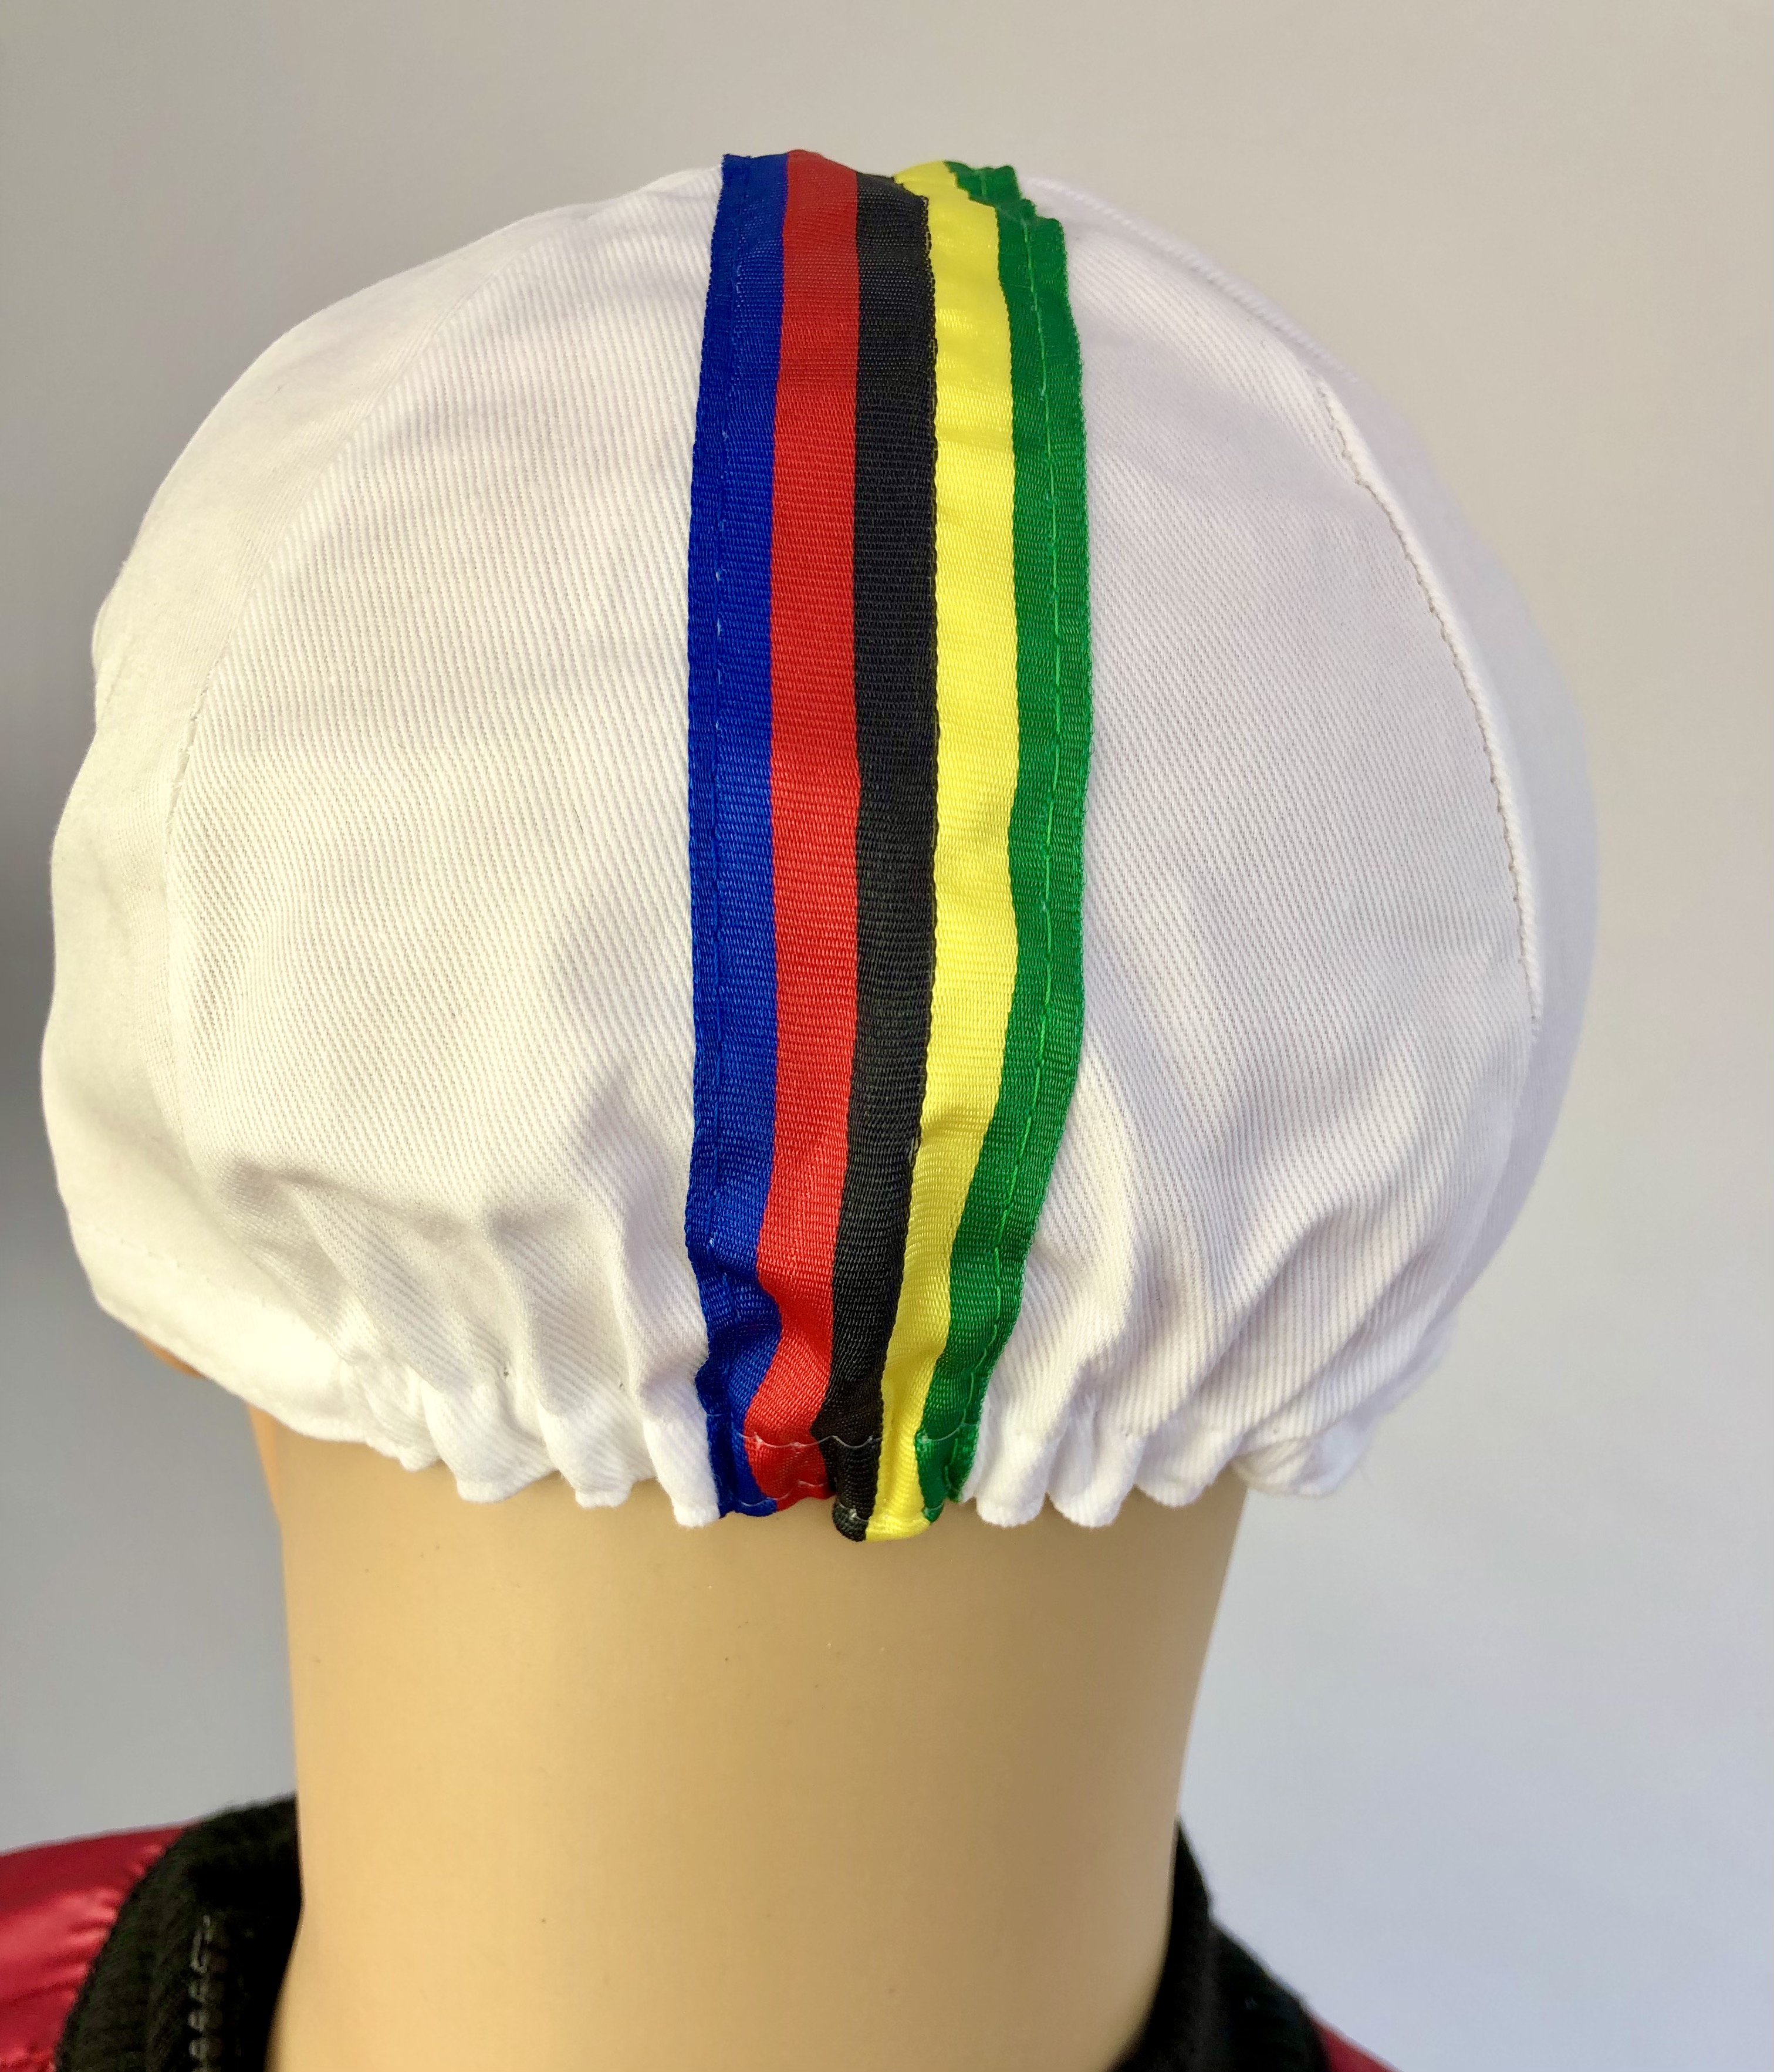 Cycling Cap white with colored stripes